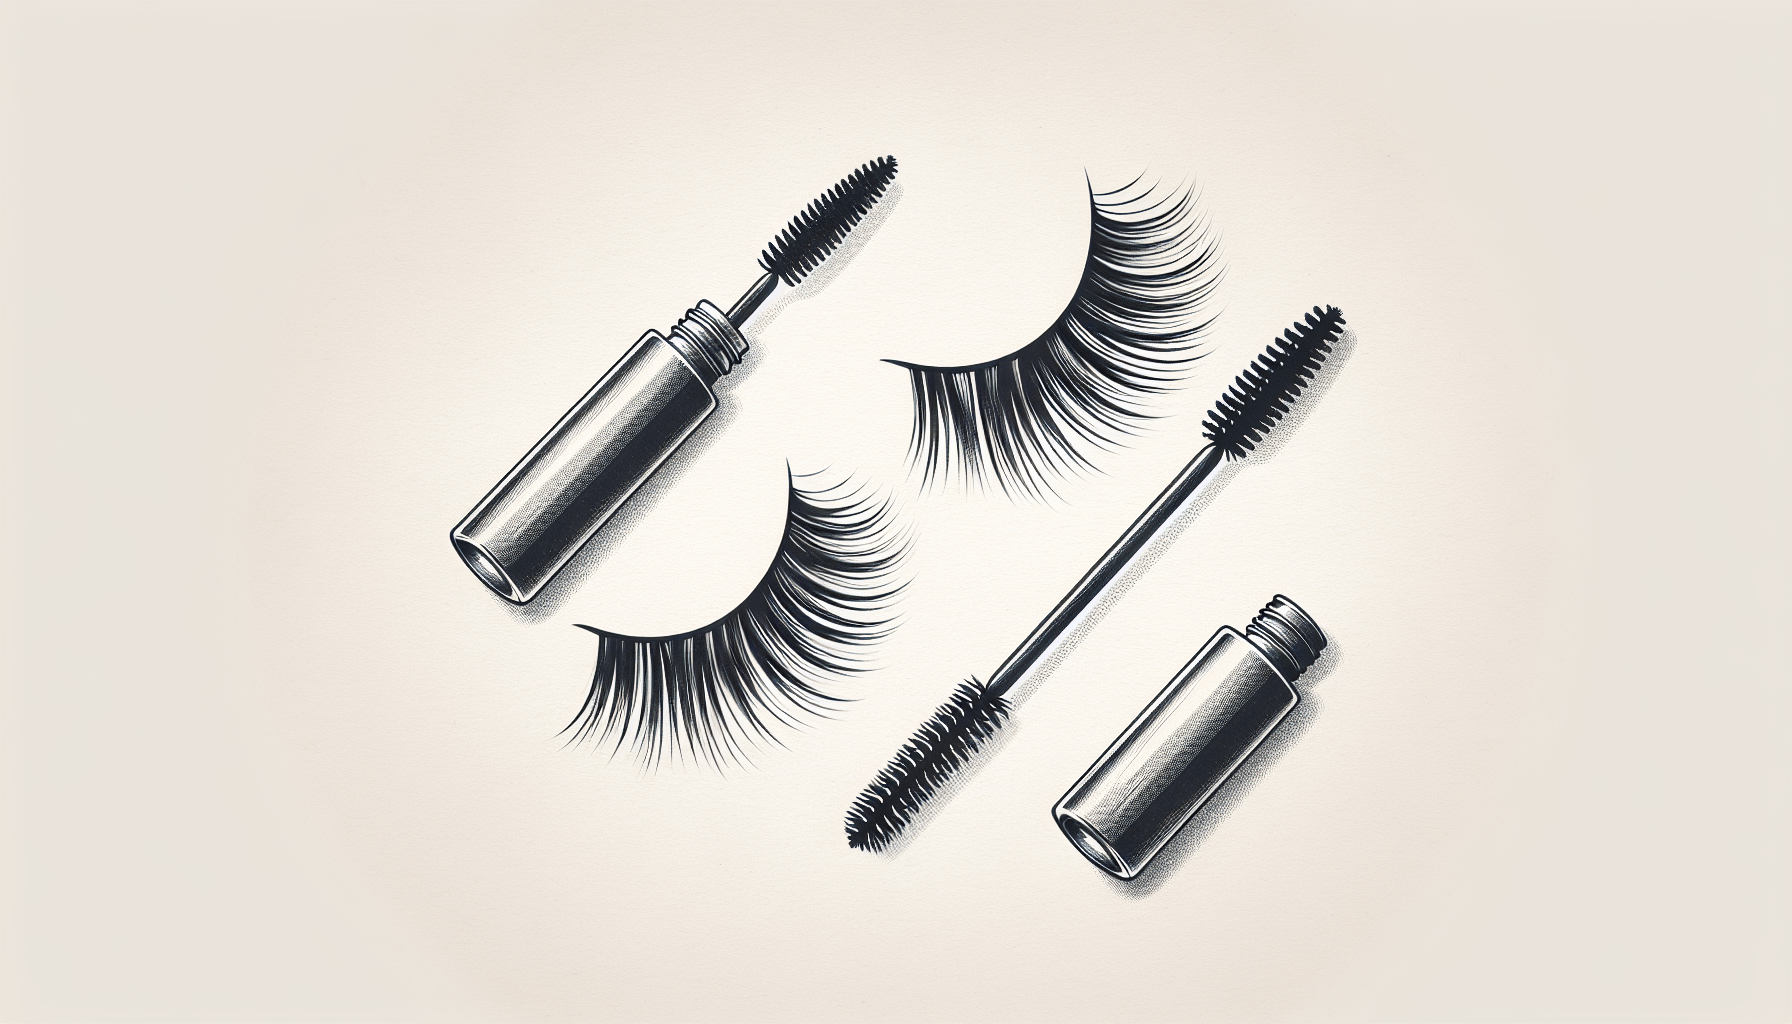 What Are Some Insider Tricks For Making False Eyelashes Look More Natural?